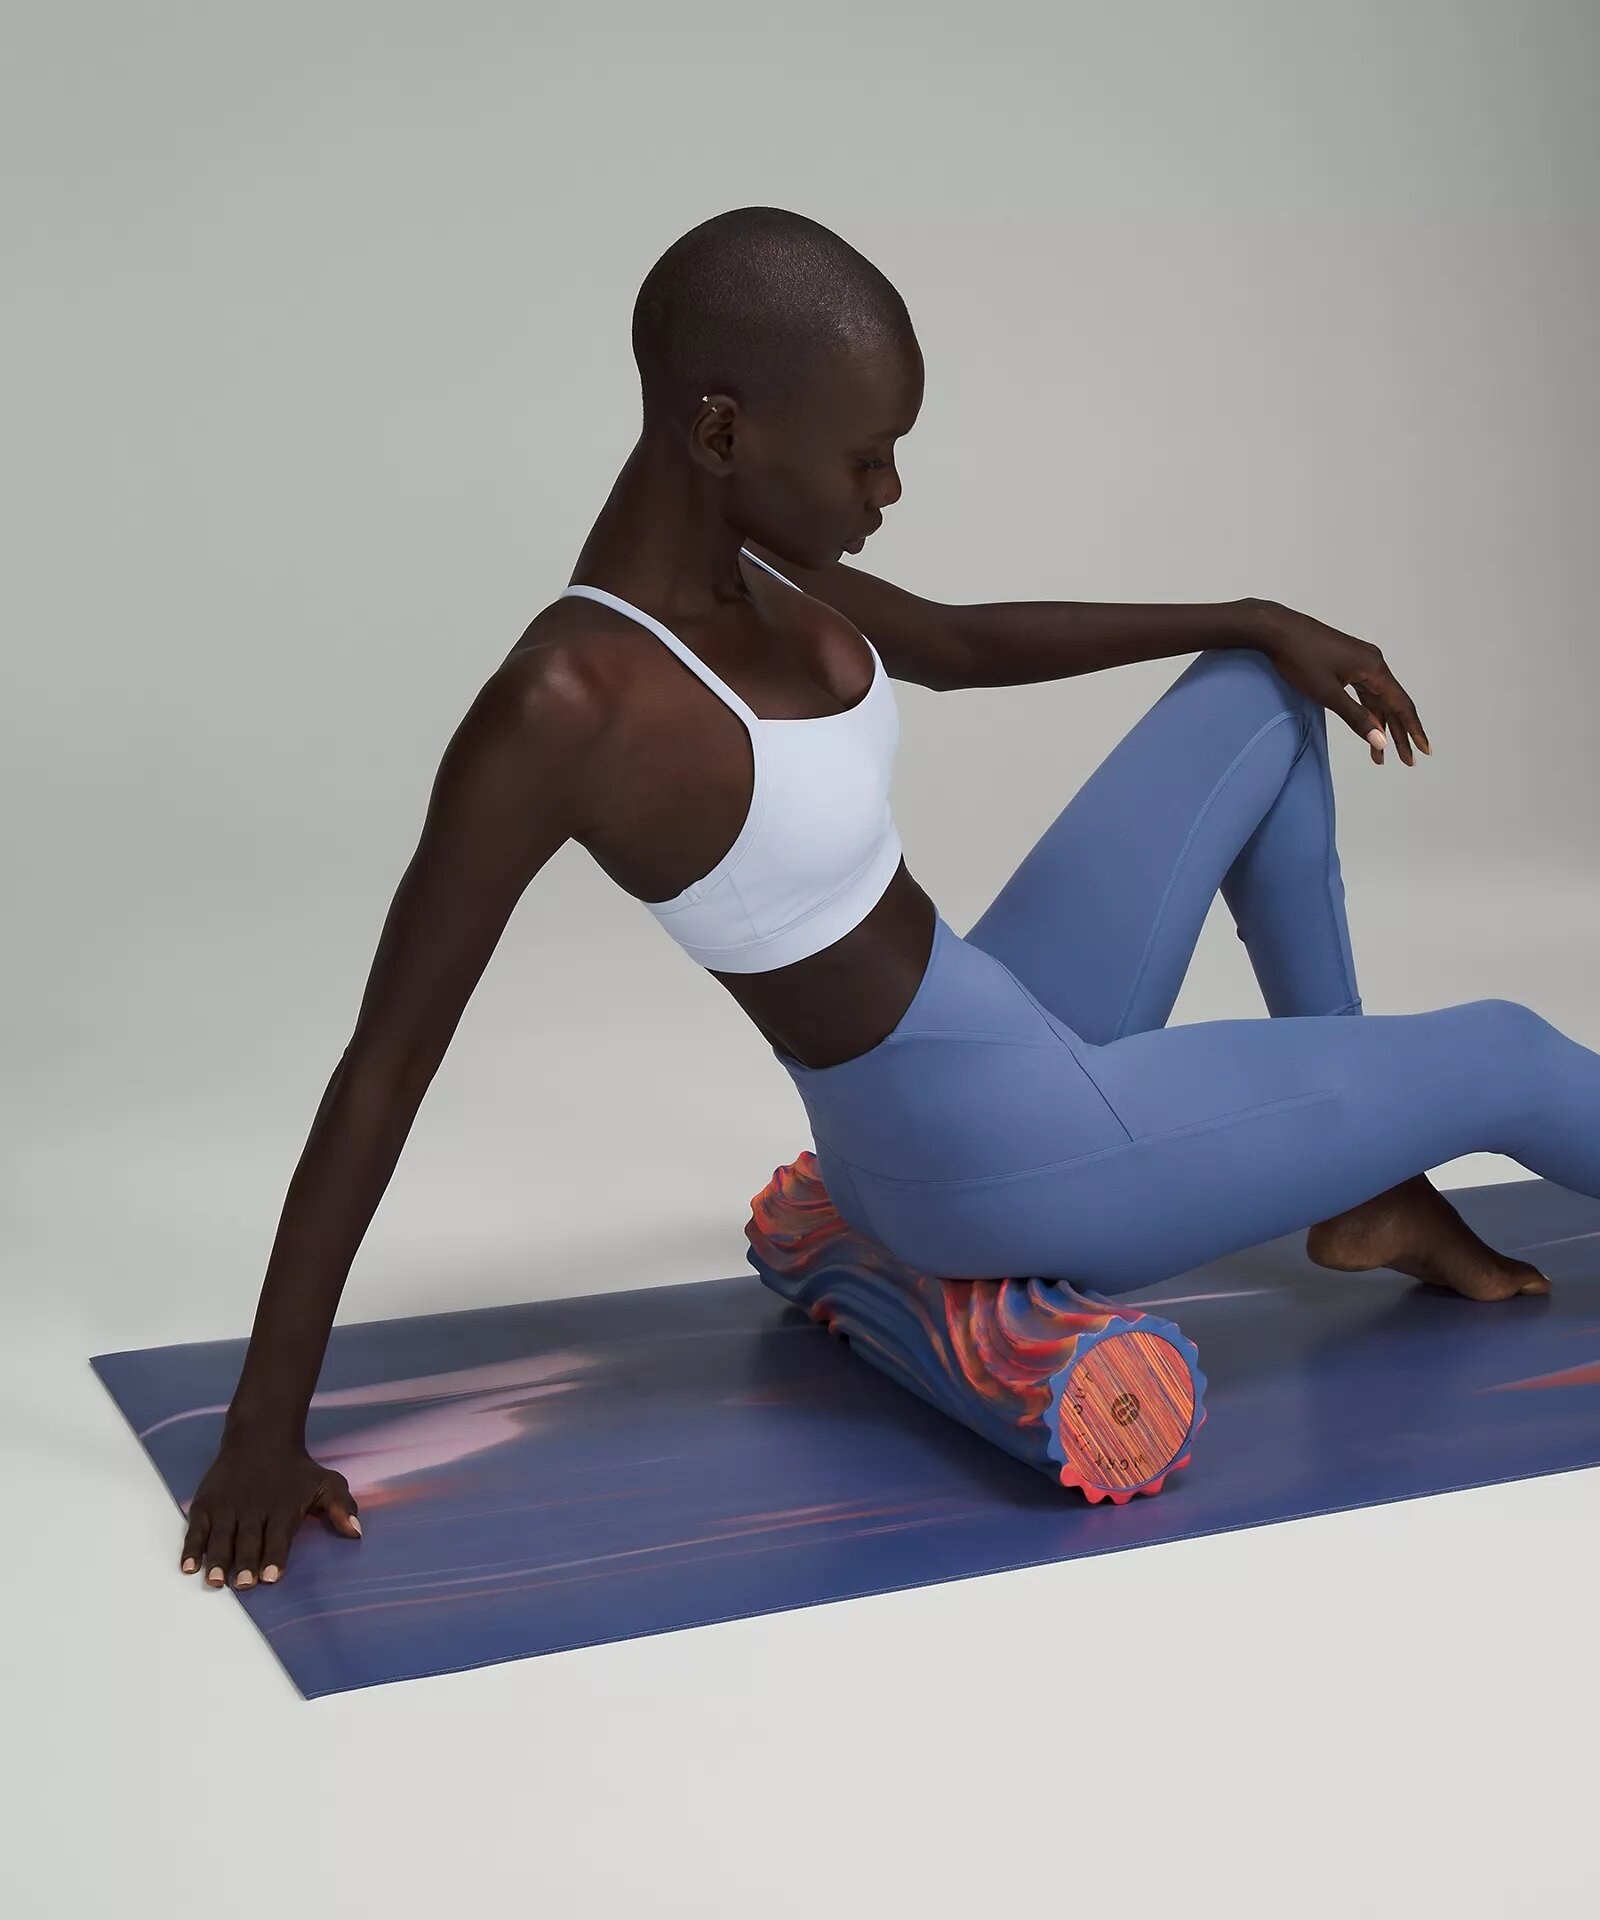 A person on a yoga mat using the double roller